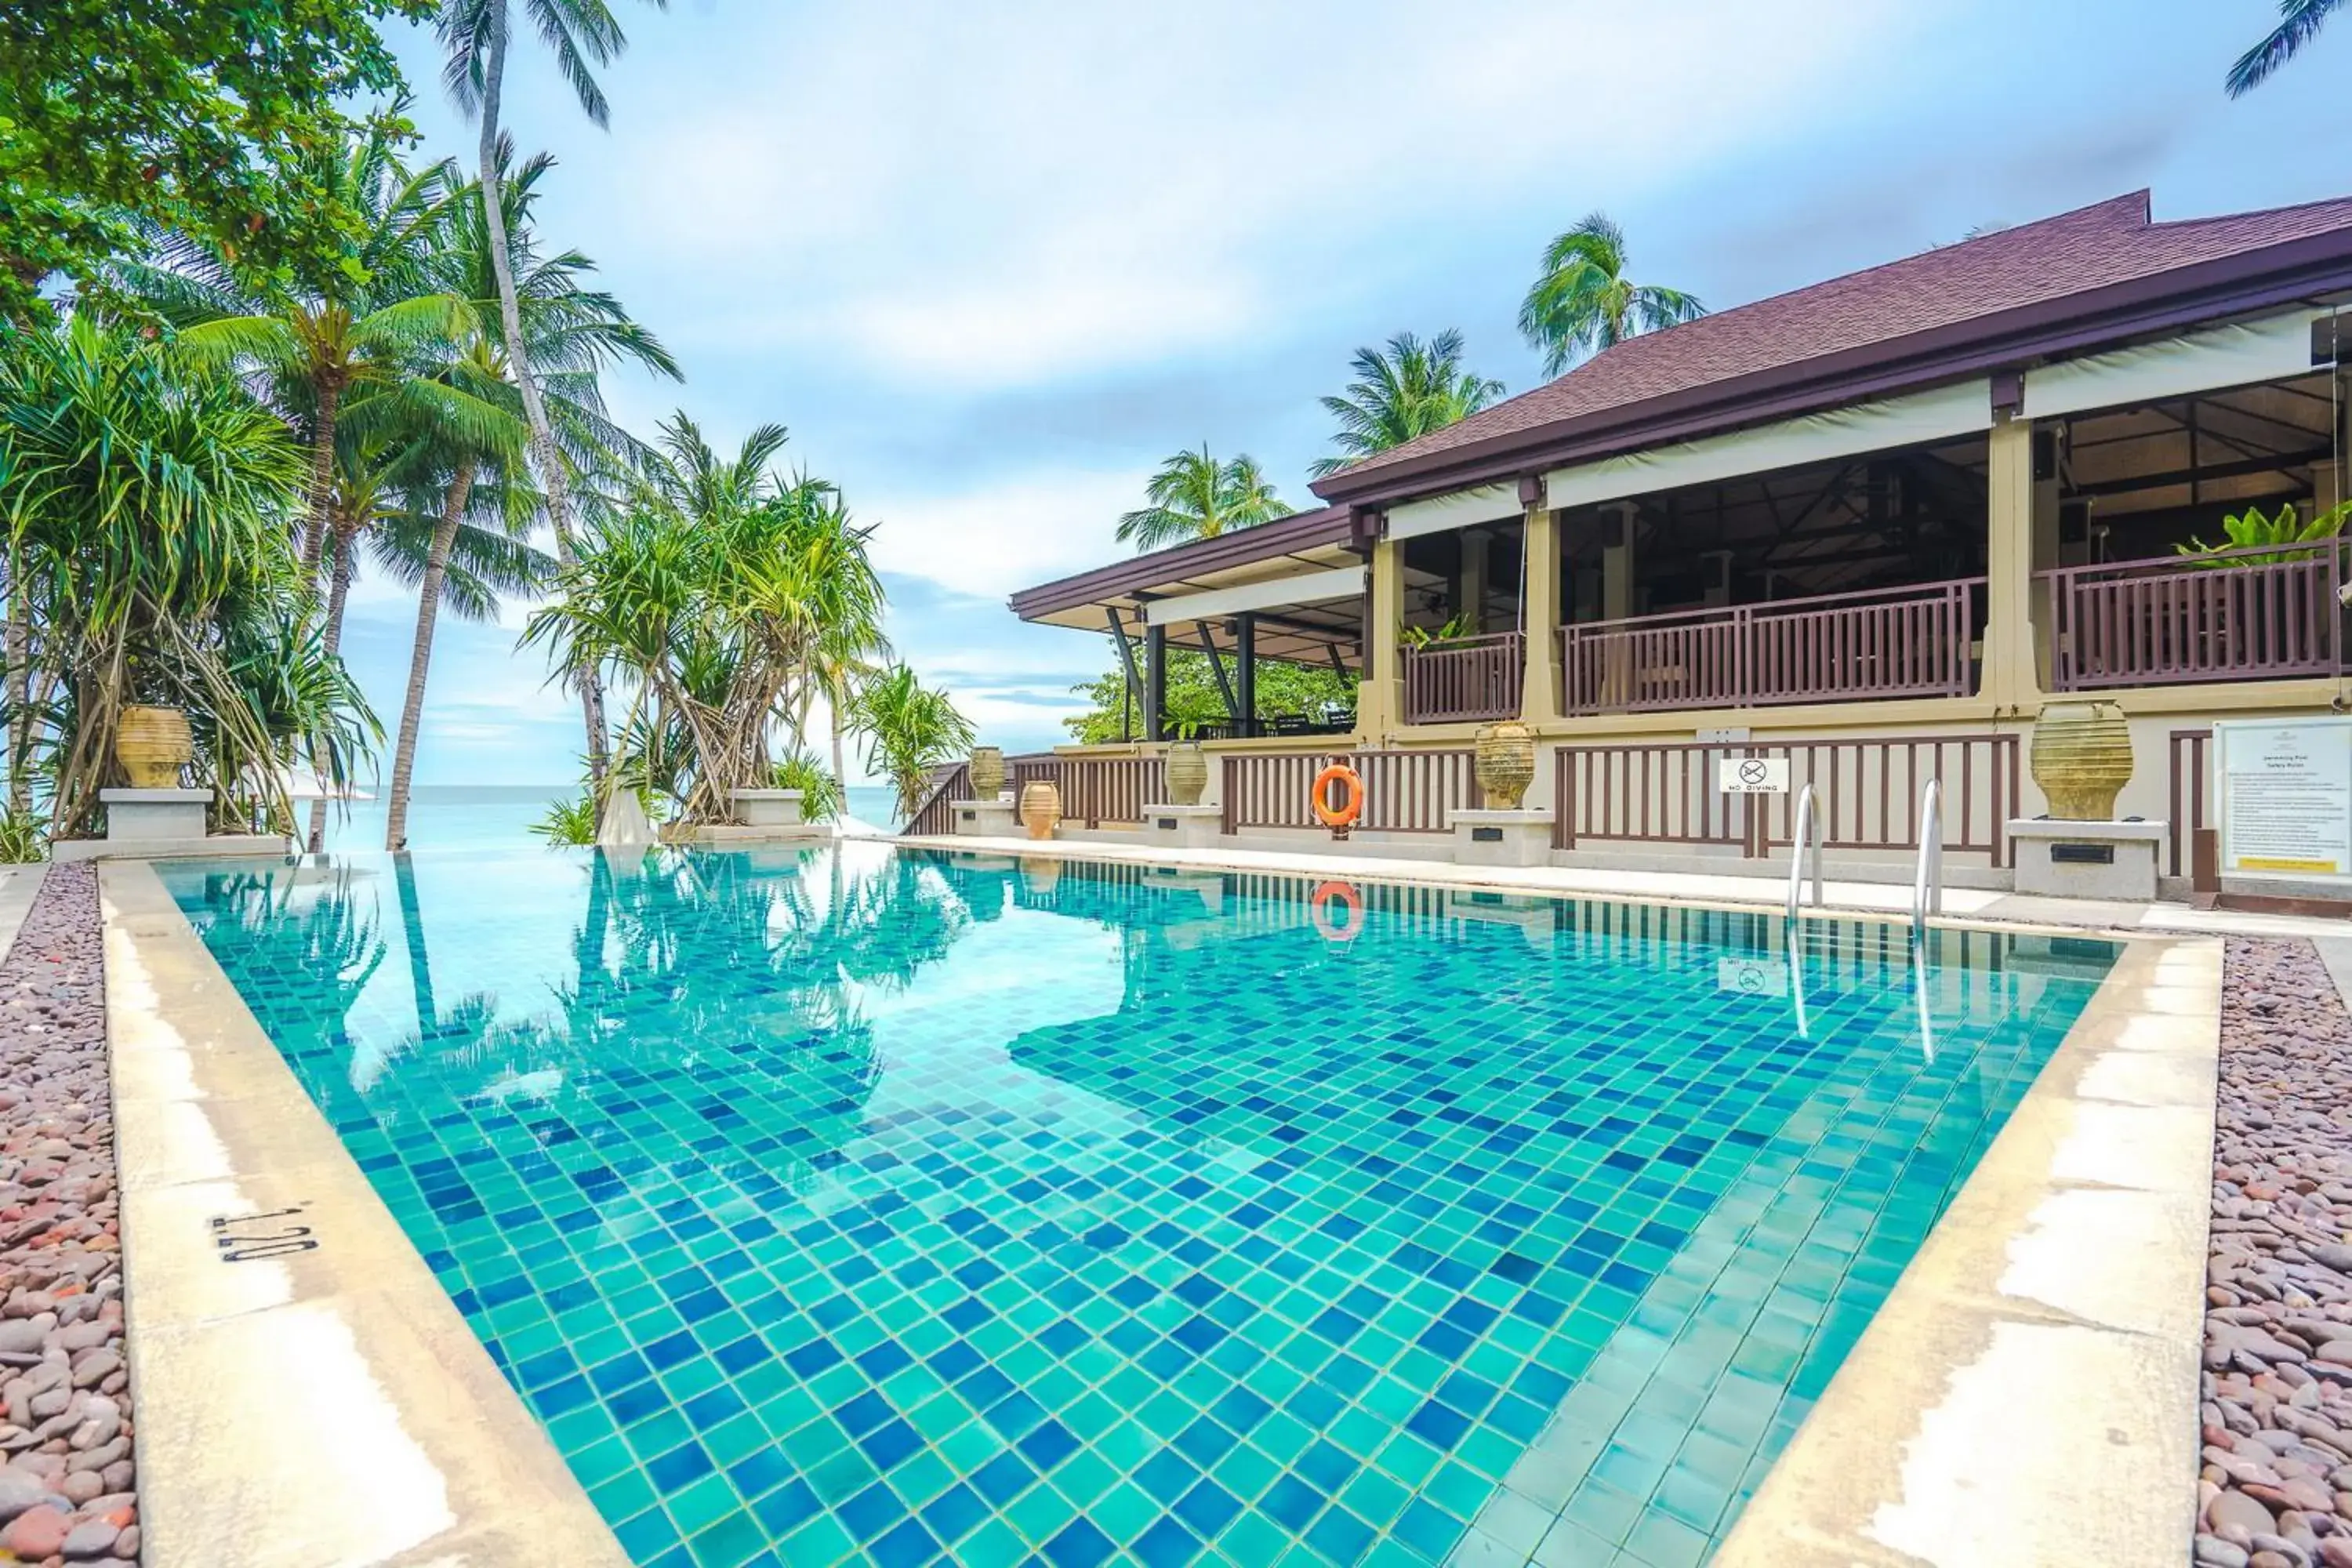 Swimming pool, Property Building in Impiana Beach Front Resort Chaweng Noi, Koh Samui